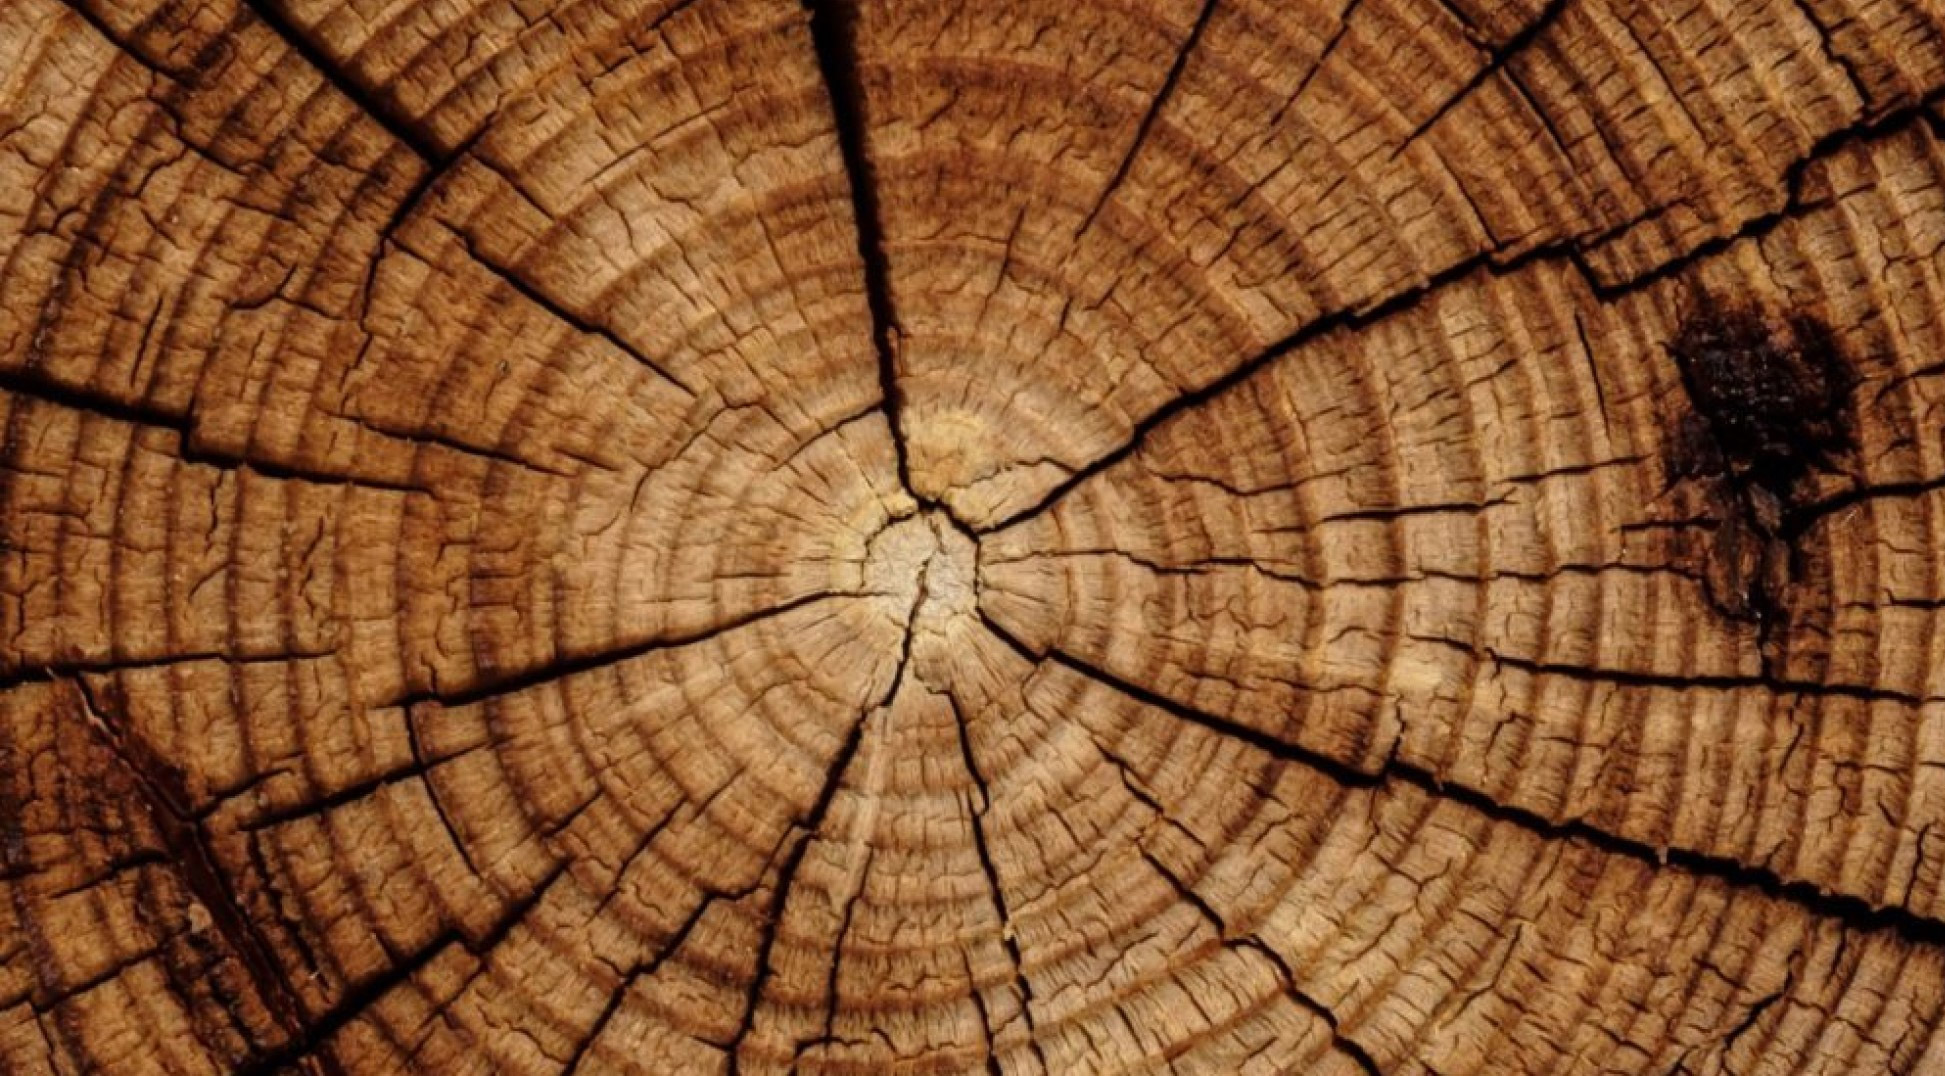 Aerial view of tree stump showing rings of old wood